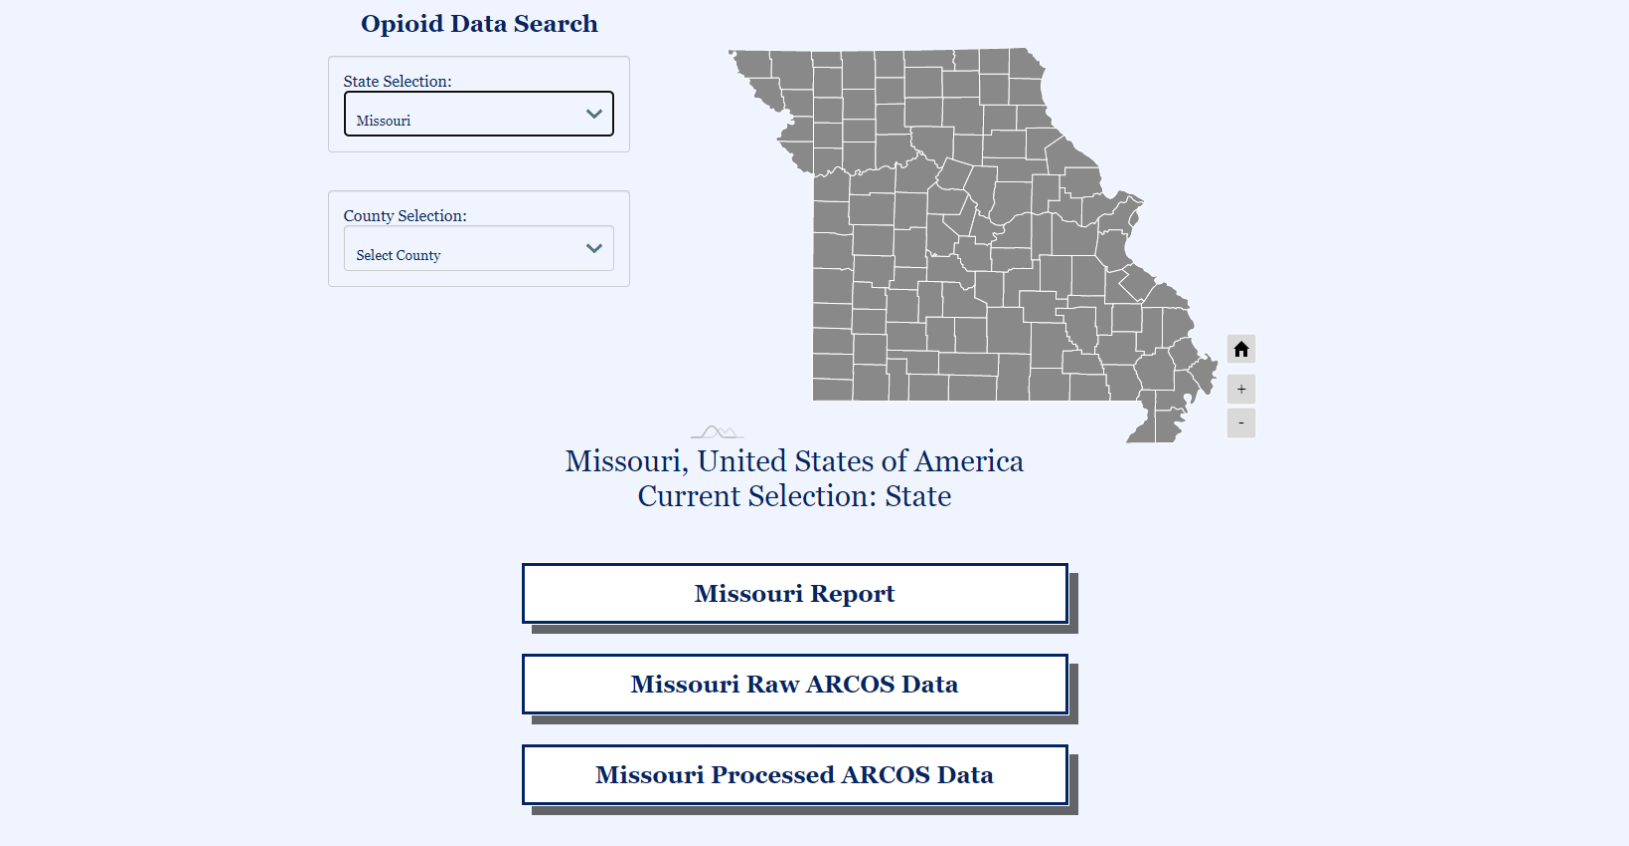 A screenshot shows the layout of our interactive opioid data visualization after selecting a state. It shows a map of the state, dropdown menus, and data/report download links.